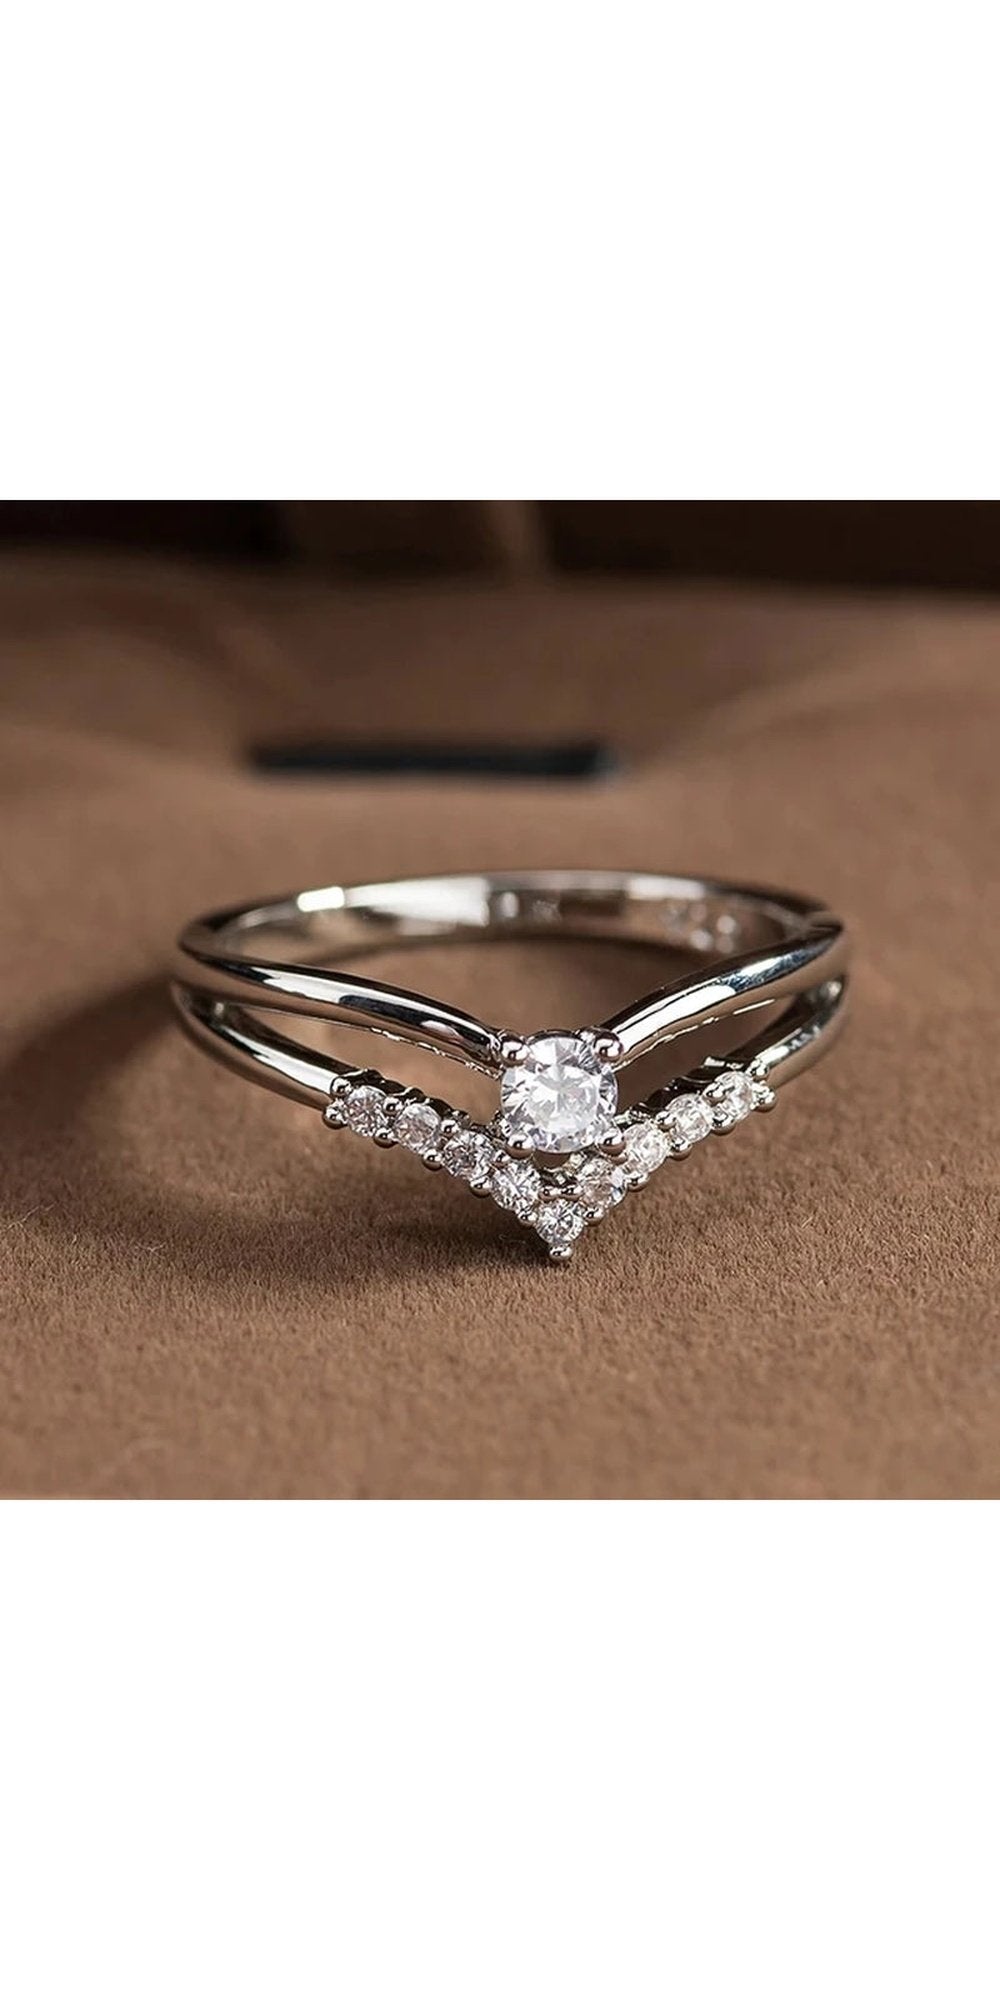 Fashion Crystal Heart Shaped Wedding Rings for Women Rose Gold Ladies Engagement Jewelry Party Gifts Accessories